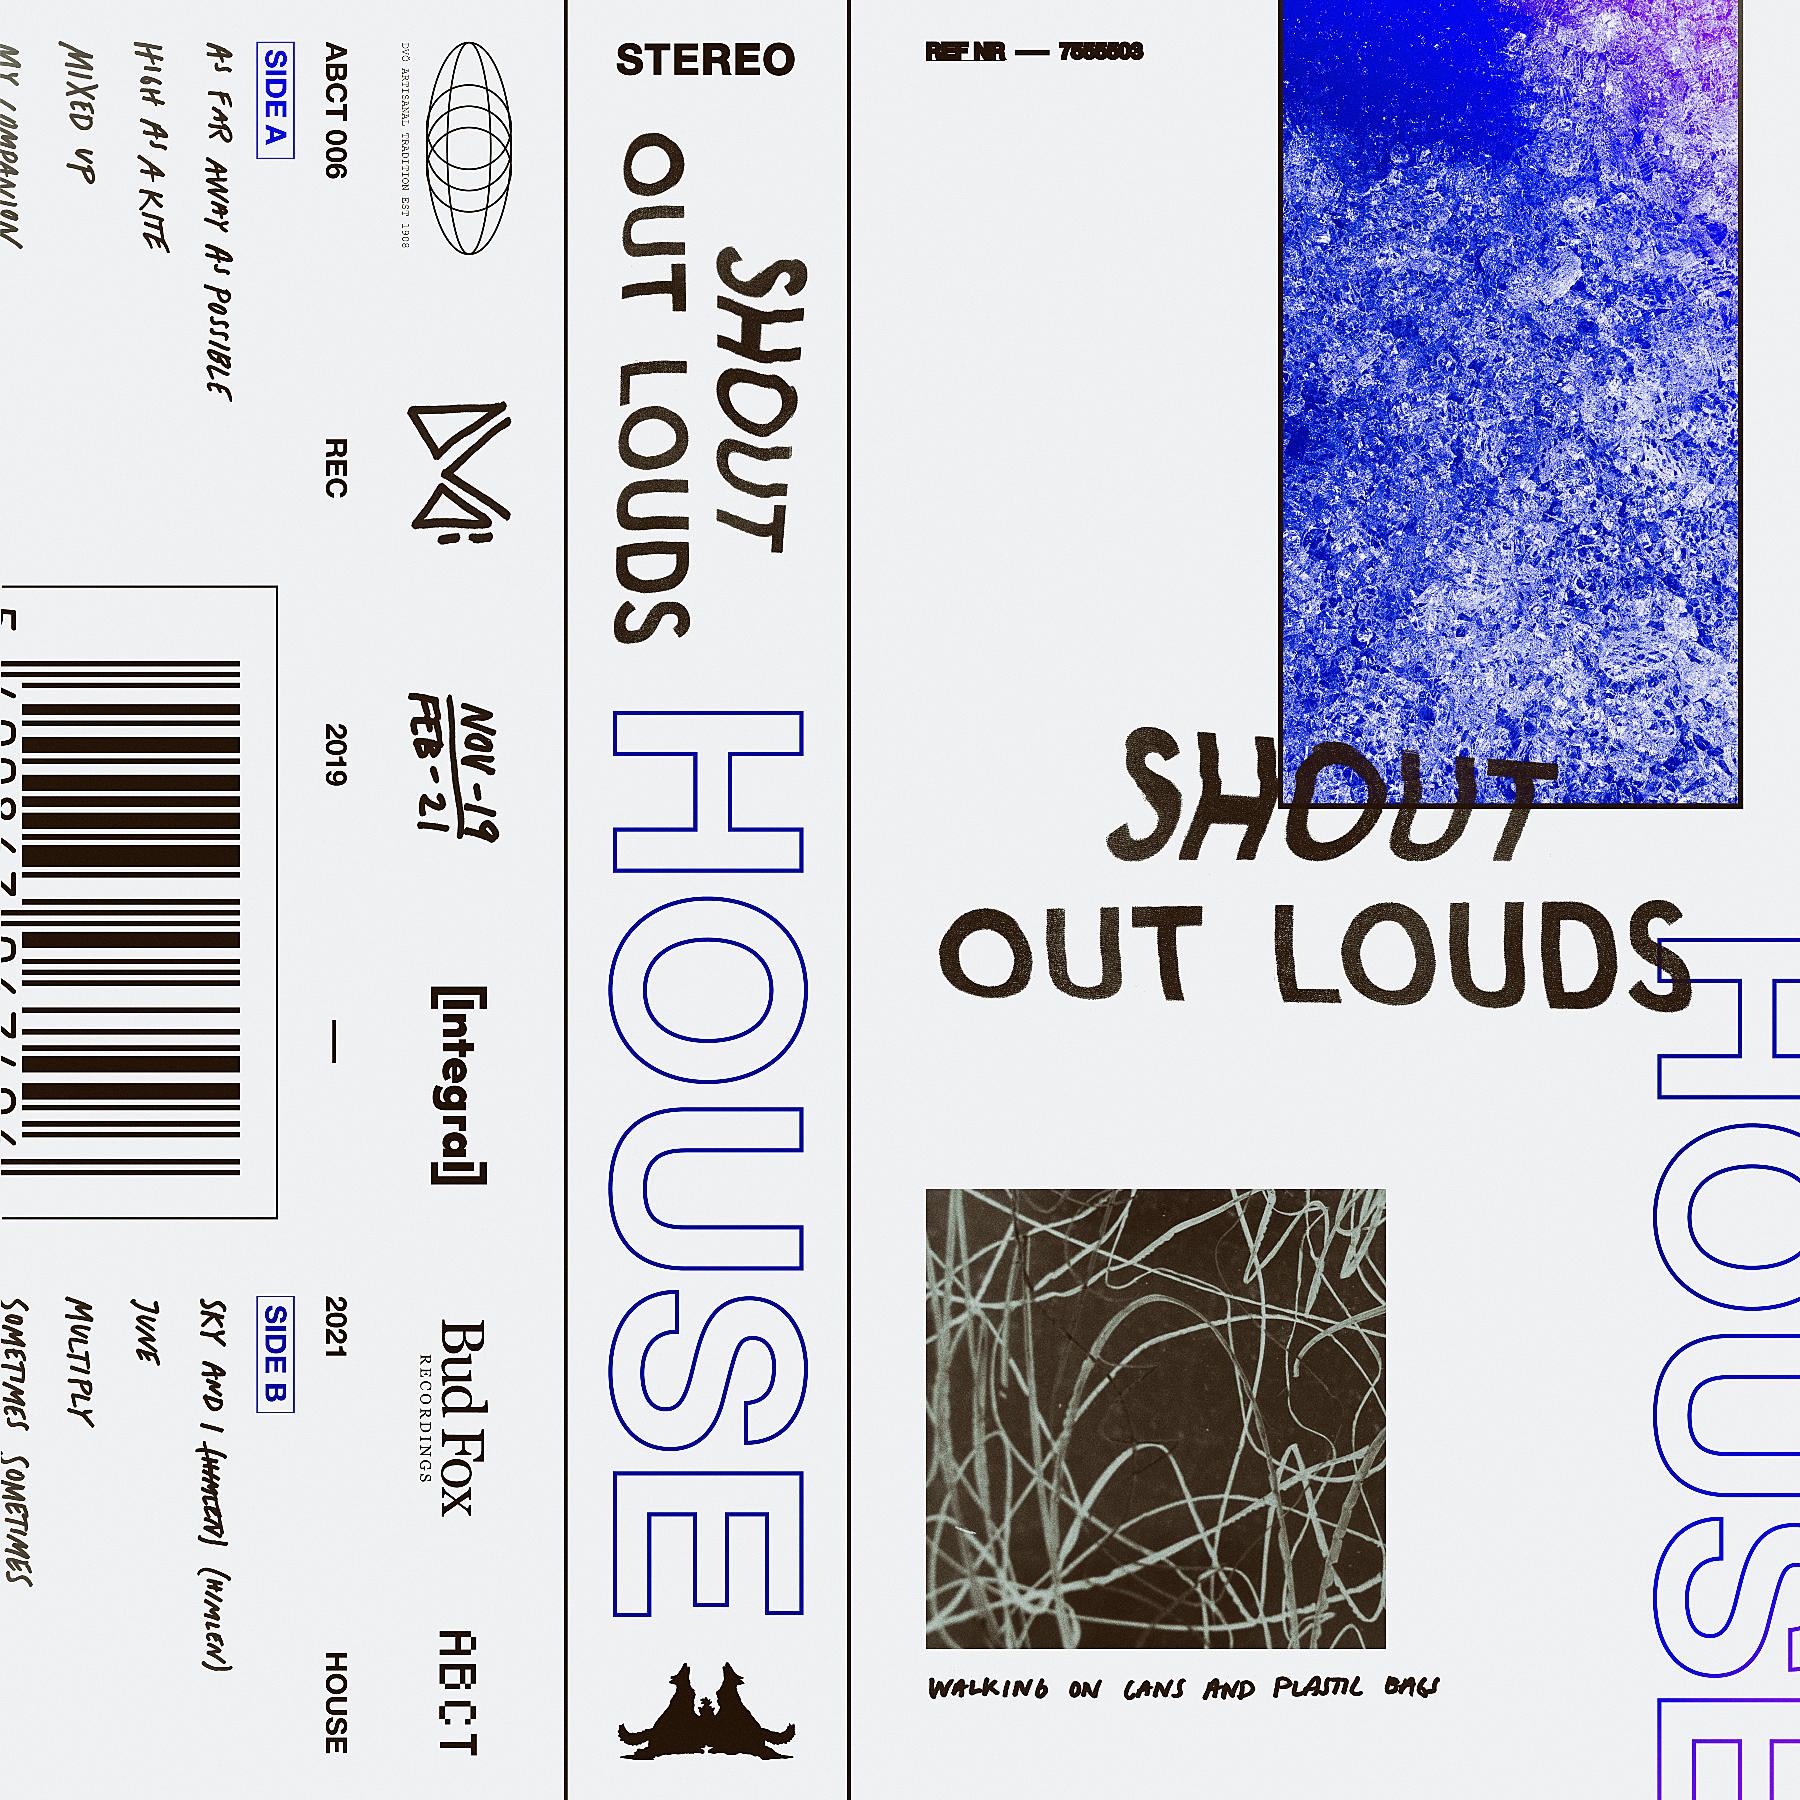 News – Shout Out Louds – House